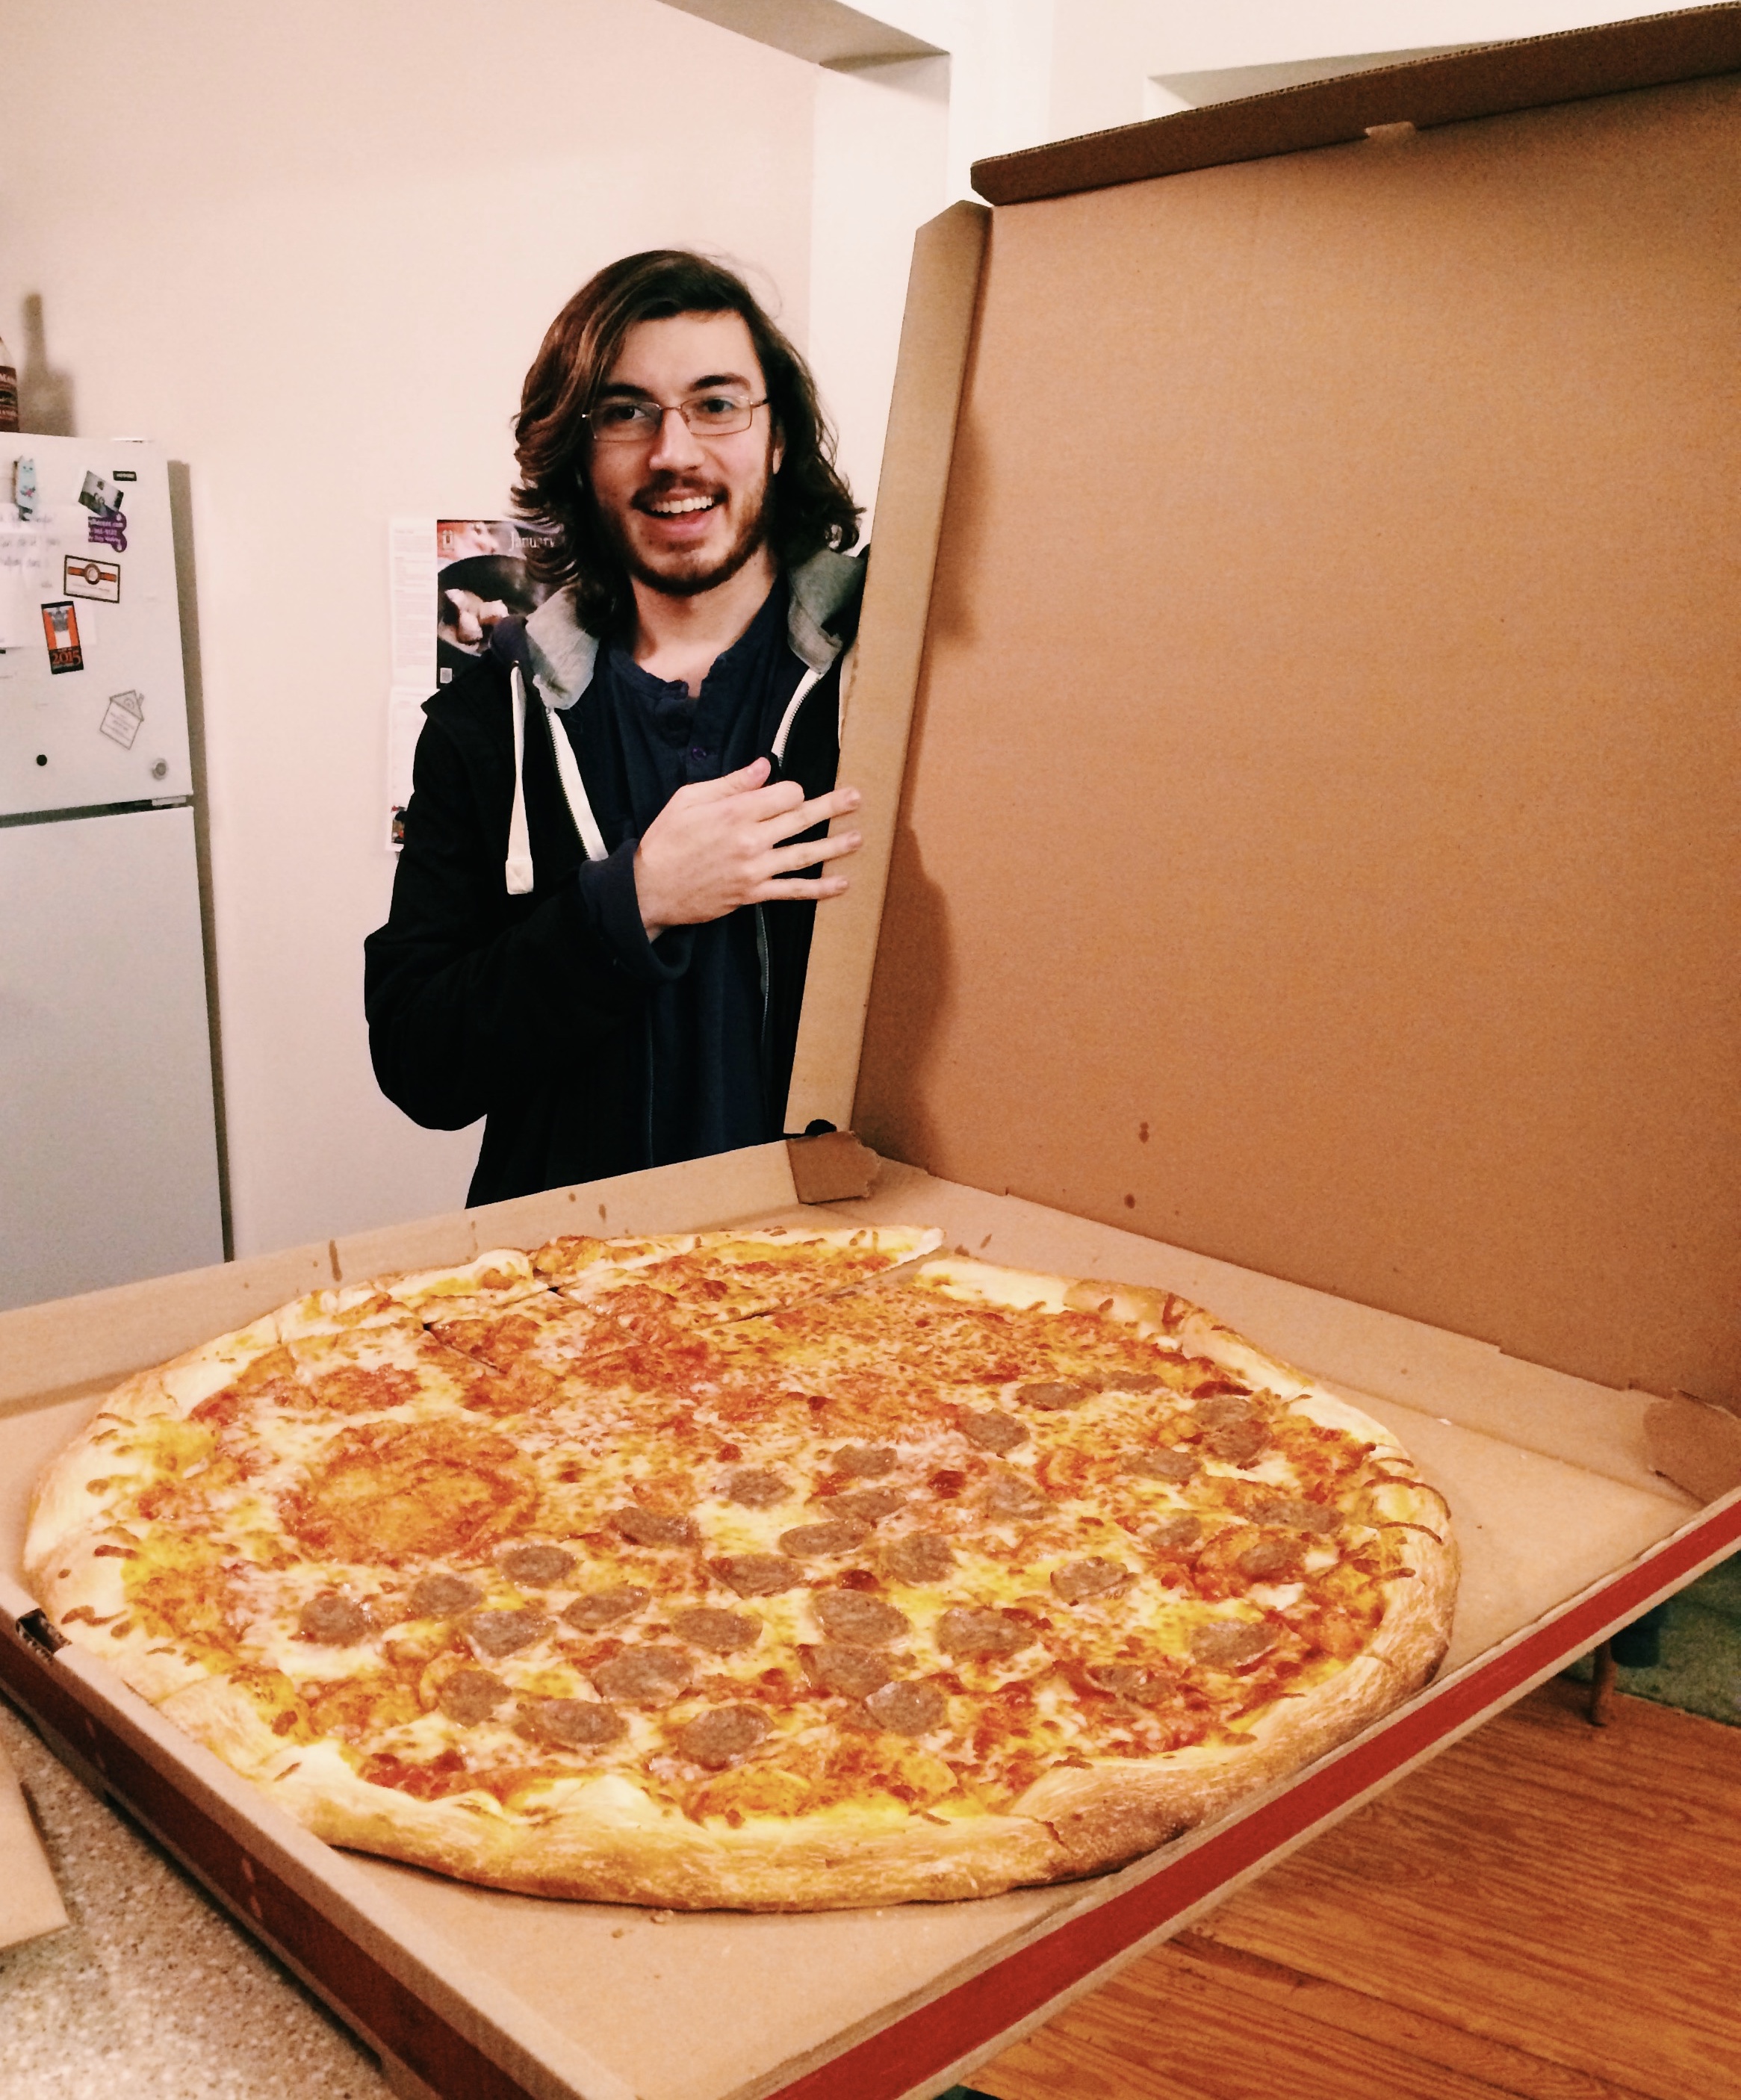 How Big Is a Large Pizza?